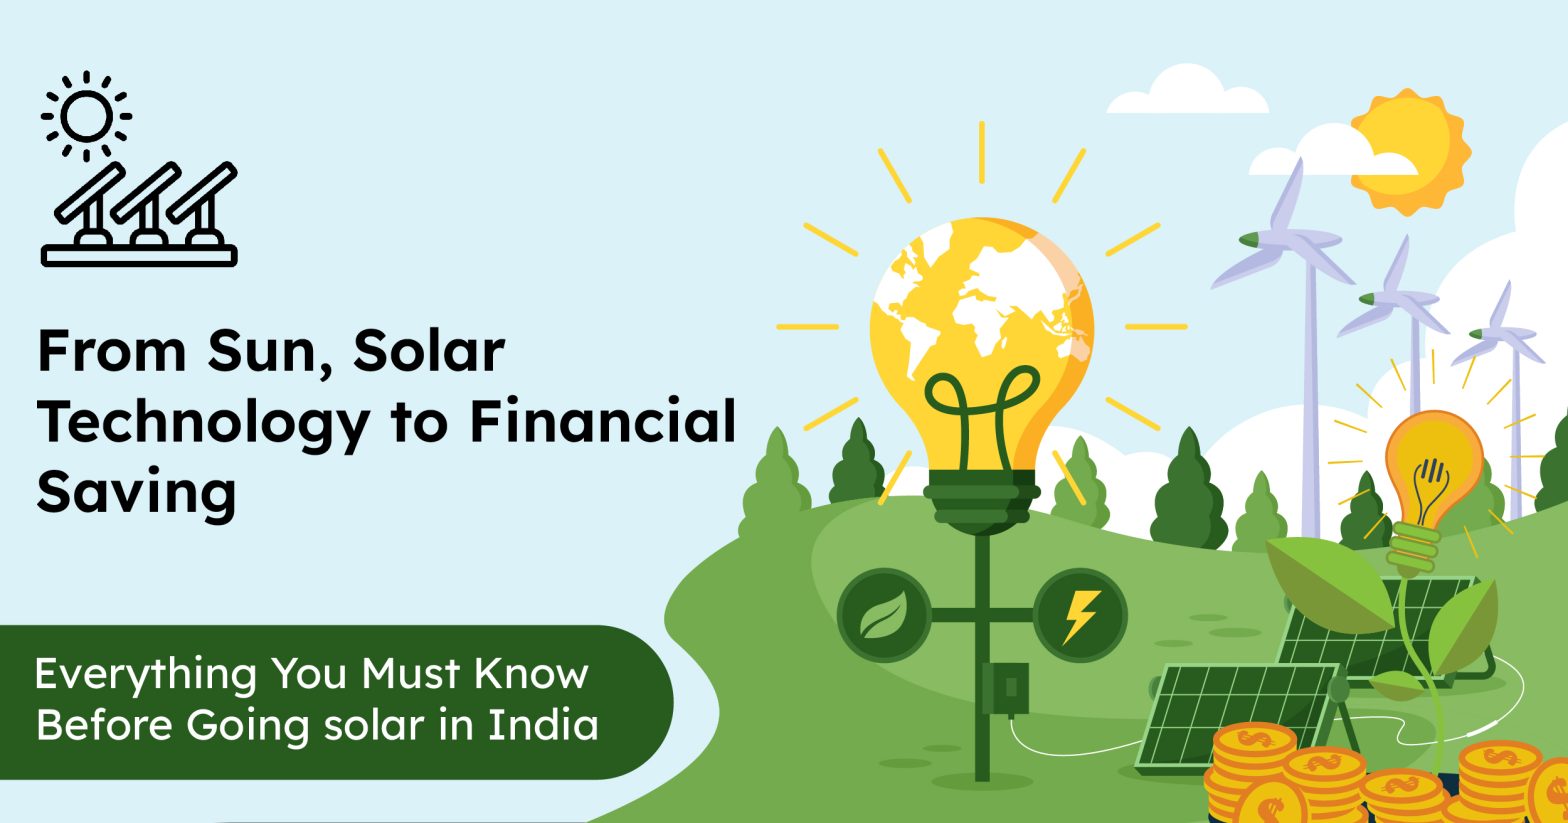 From Sun, Solar Technology to Financial Saving: Everything You Must Know Before Going Solar in India